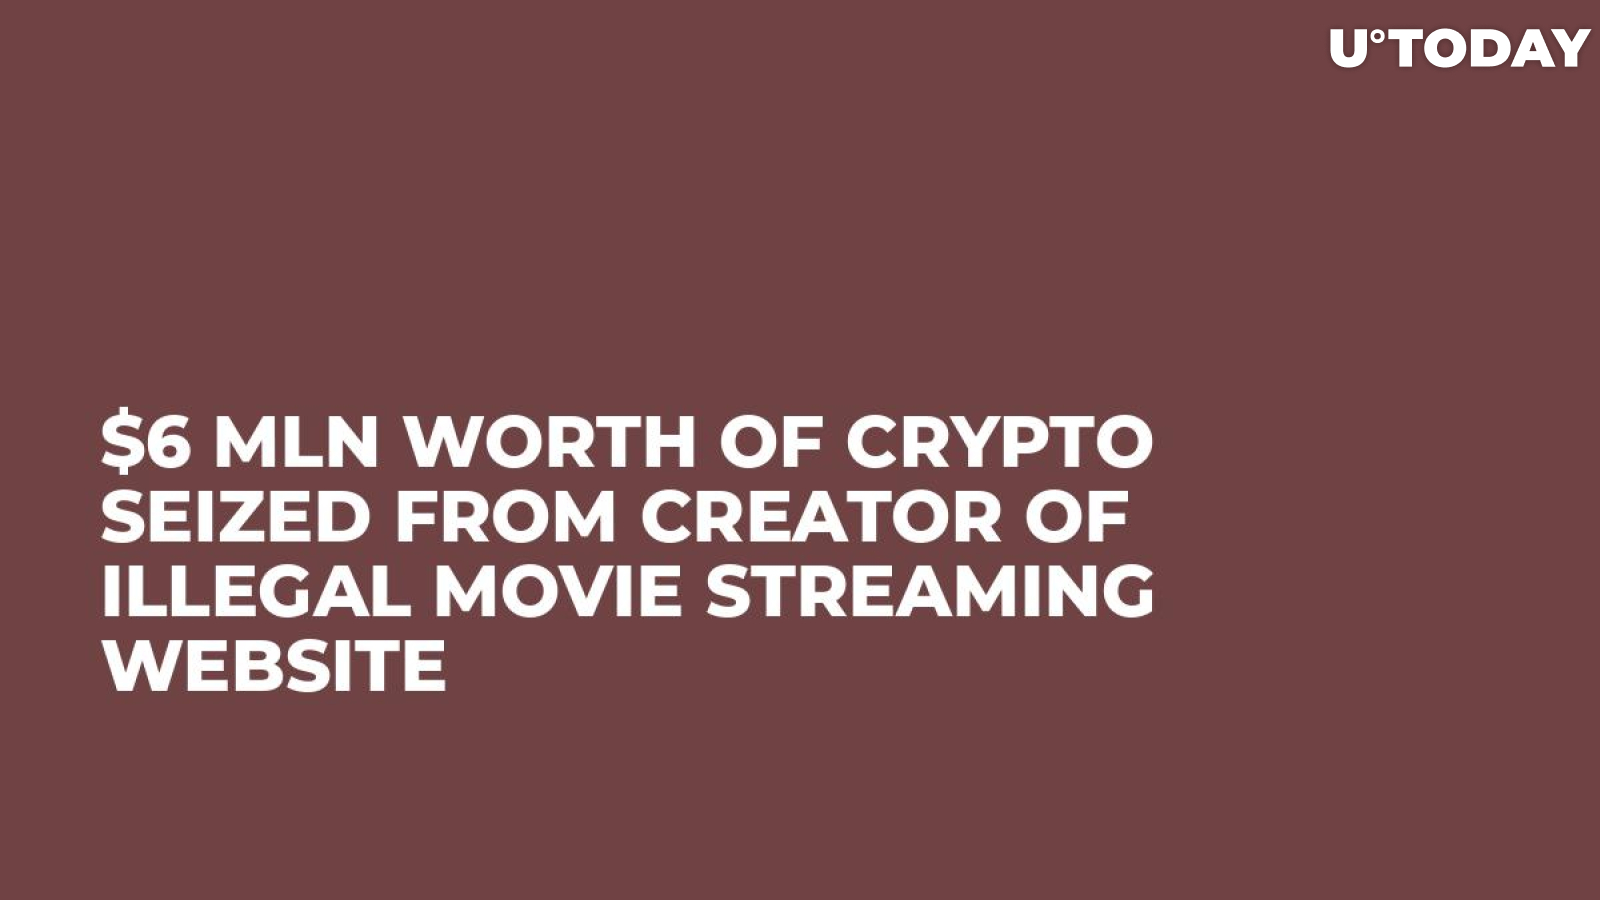 $6 Mln Worth of Crypto Seized from Creator of Illegal Movie Streaming Website